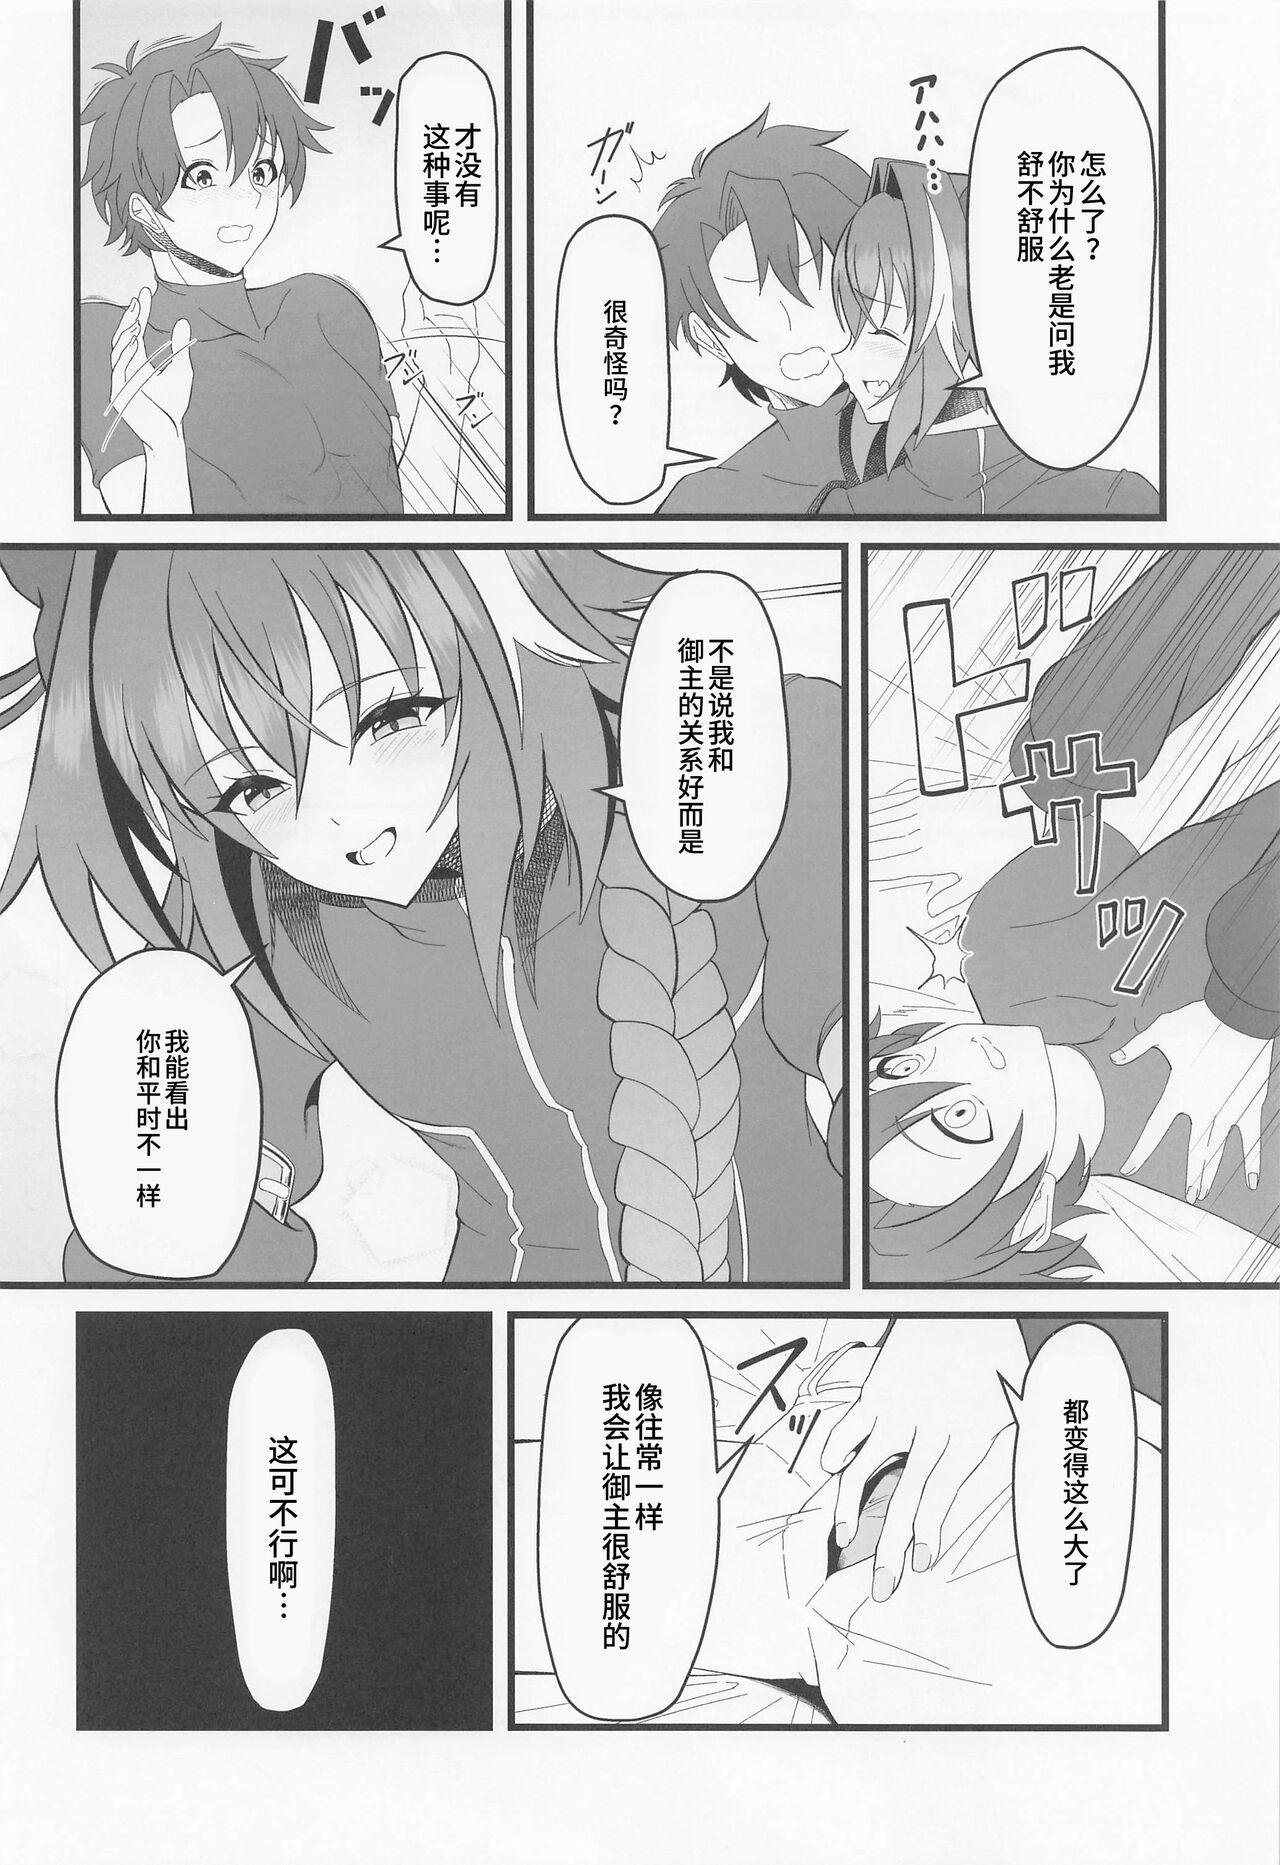 Clip Kimi no Ichiban ni Naritakute - I wanted to be your number one. - Fate grand order Large - Page 7